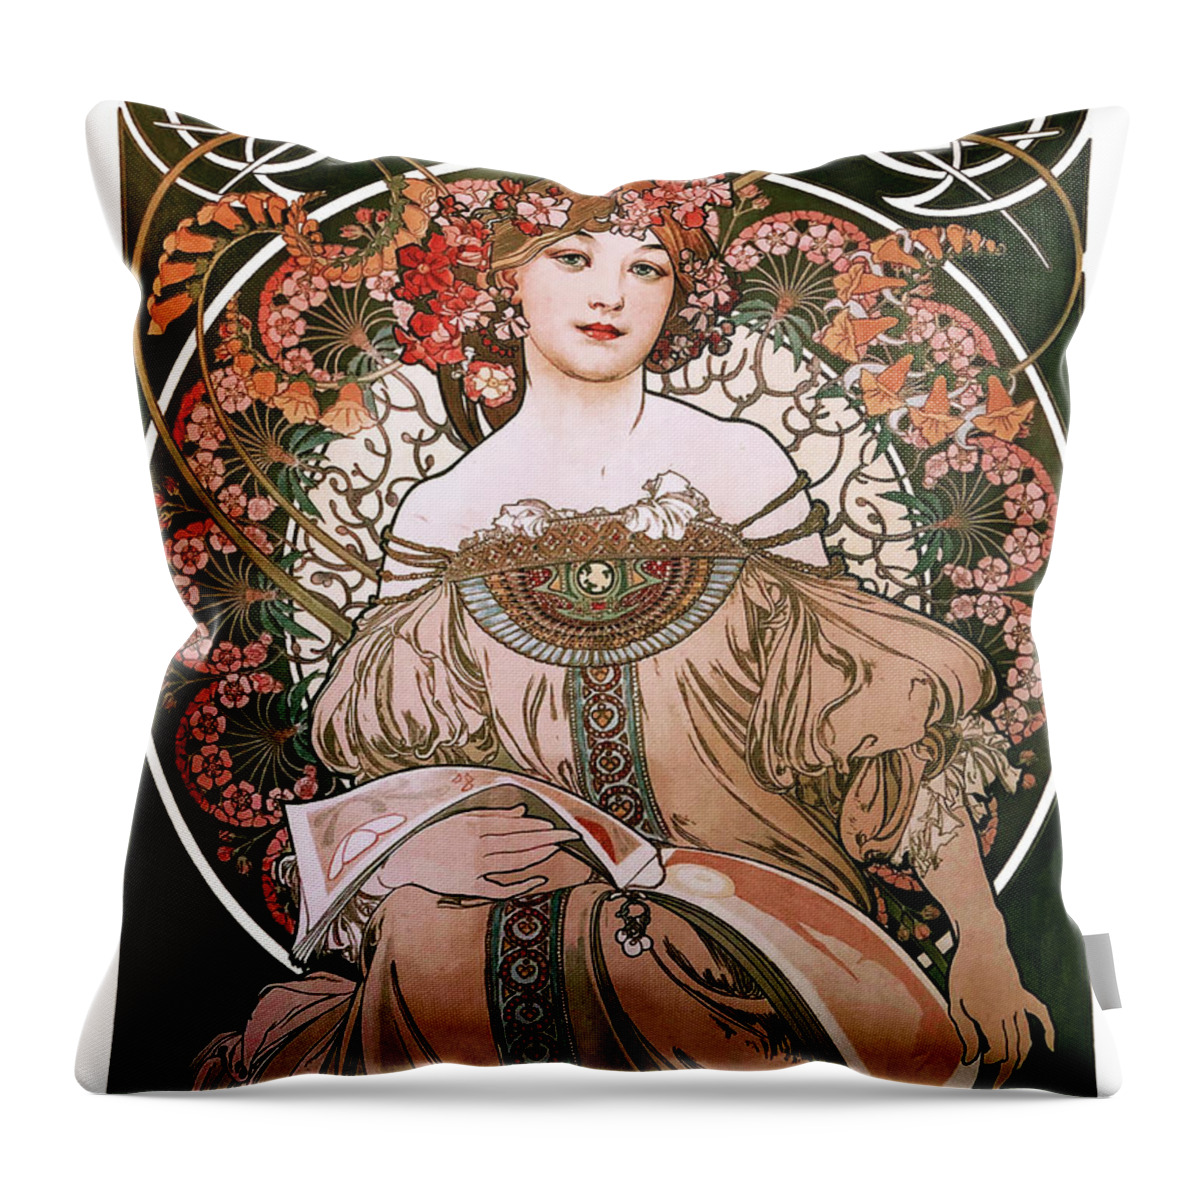 Daydream Throw Pillow featuring the painting Daydream by Alphonse Mucha White Background by Rolando Burbon